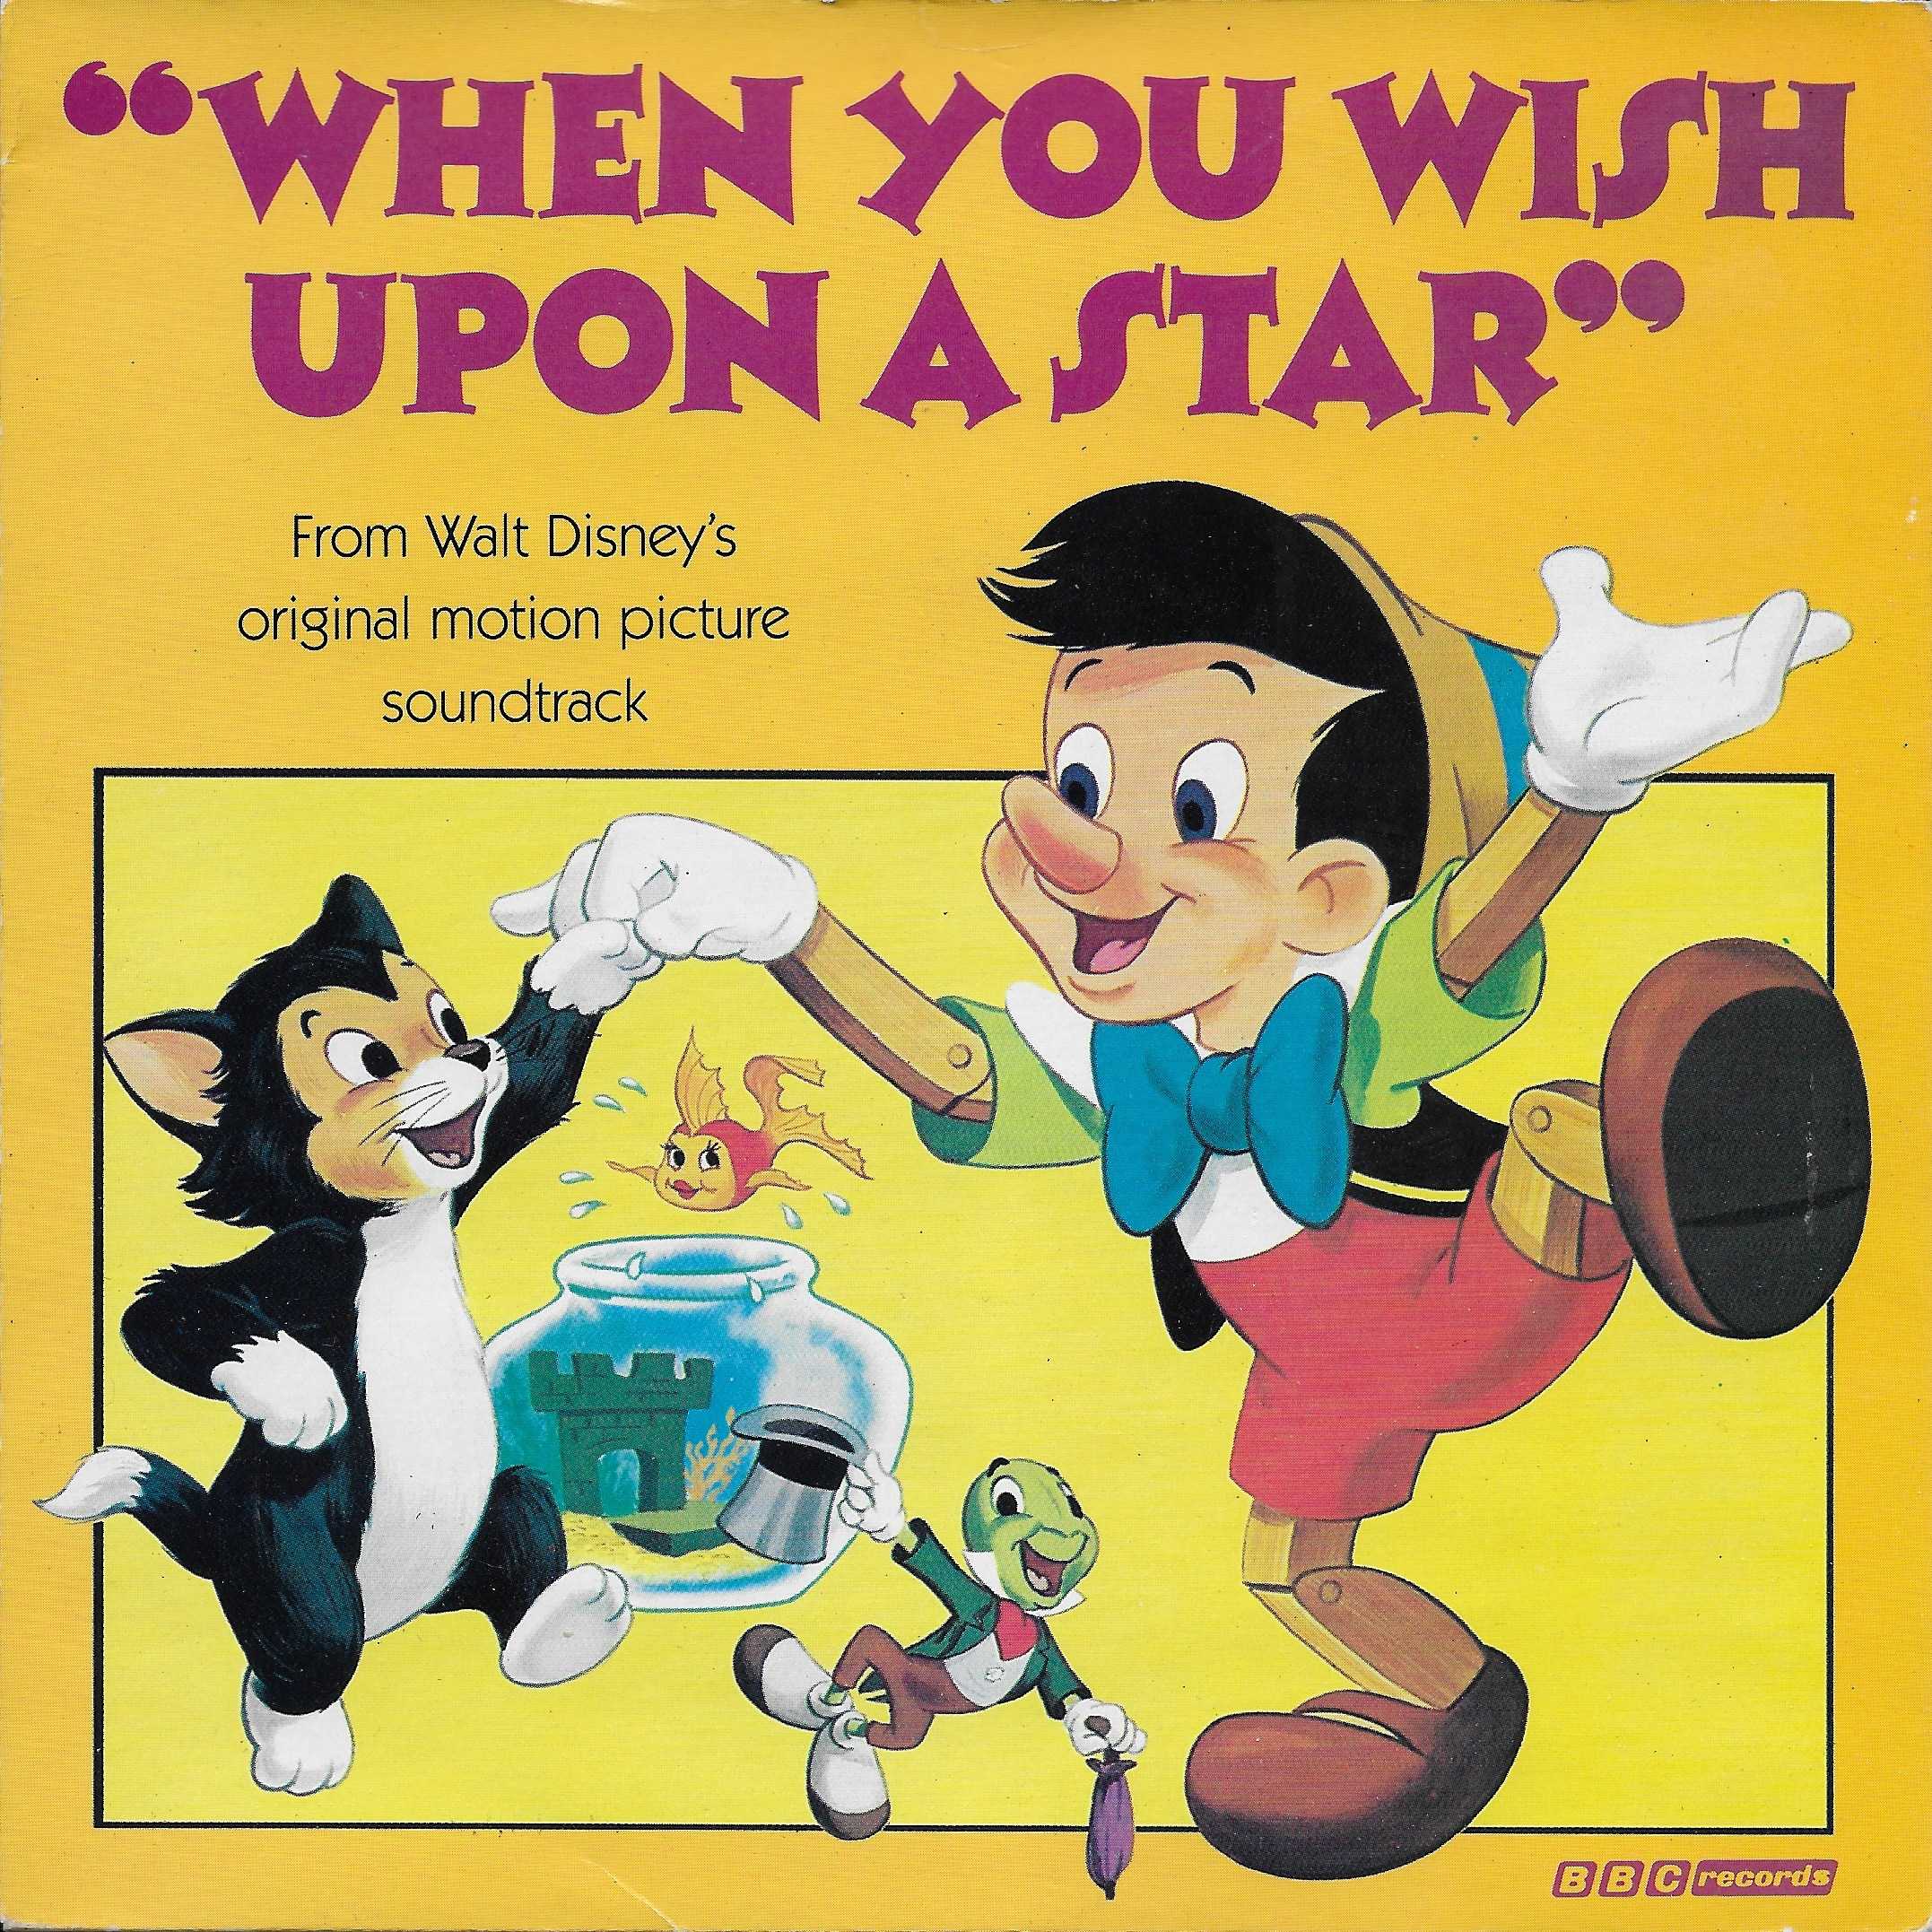 Picture of RESL 197 When you wish upon a star by artist Washington / Harline \(Pinocchio - Jiminy Cricket\) from the BBC records and Tapes library